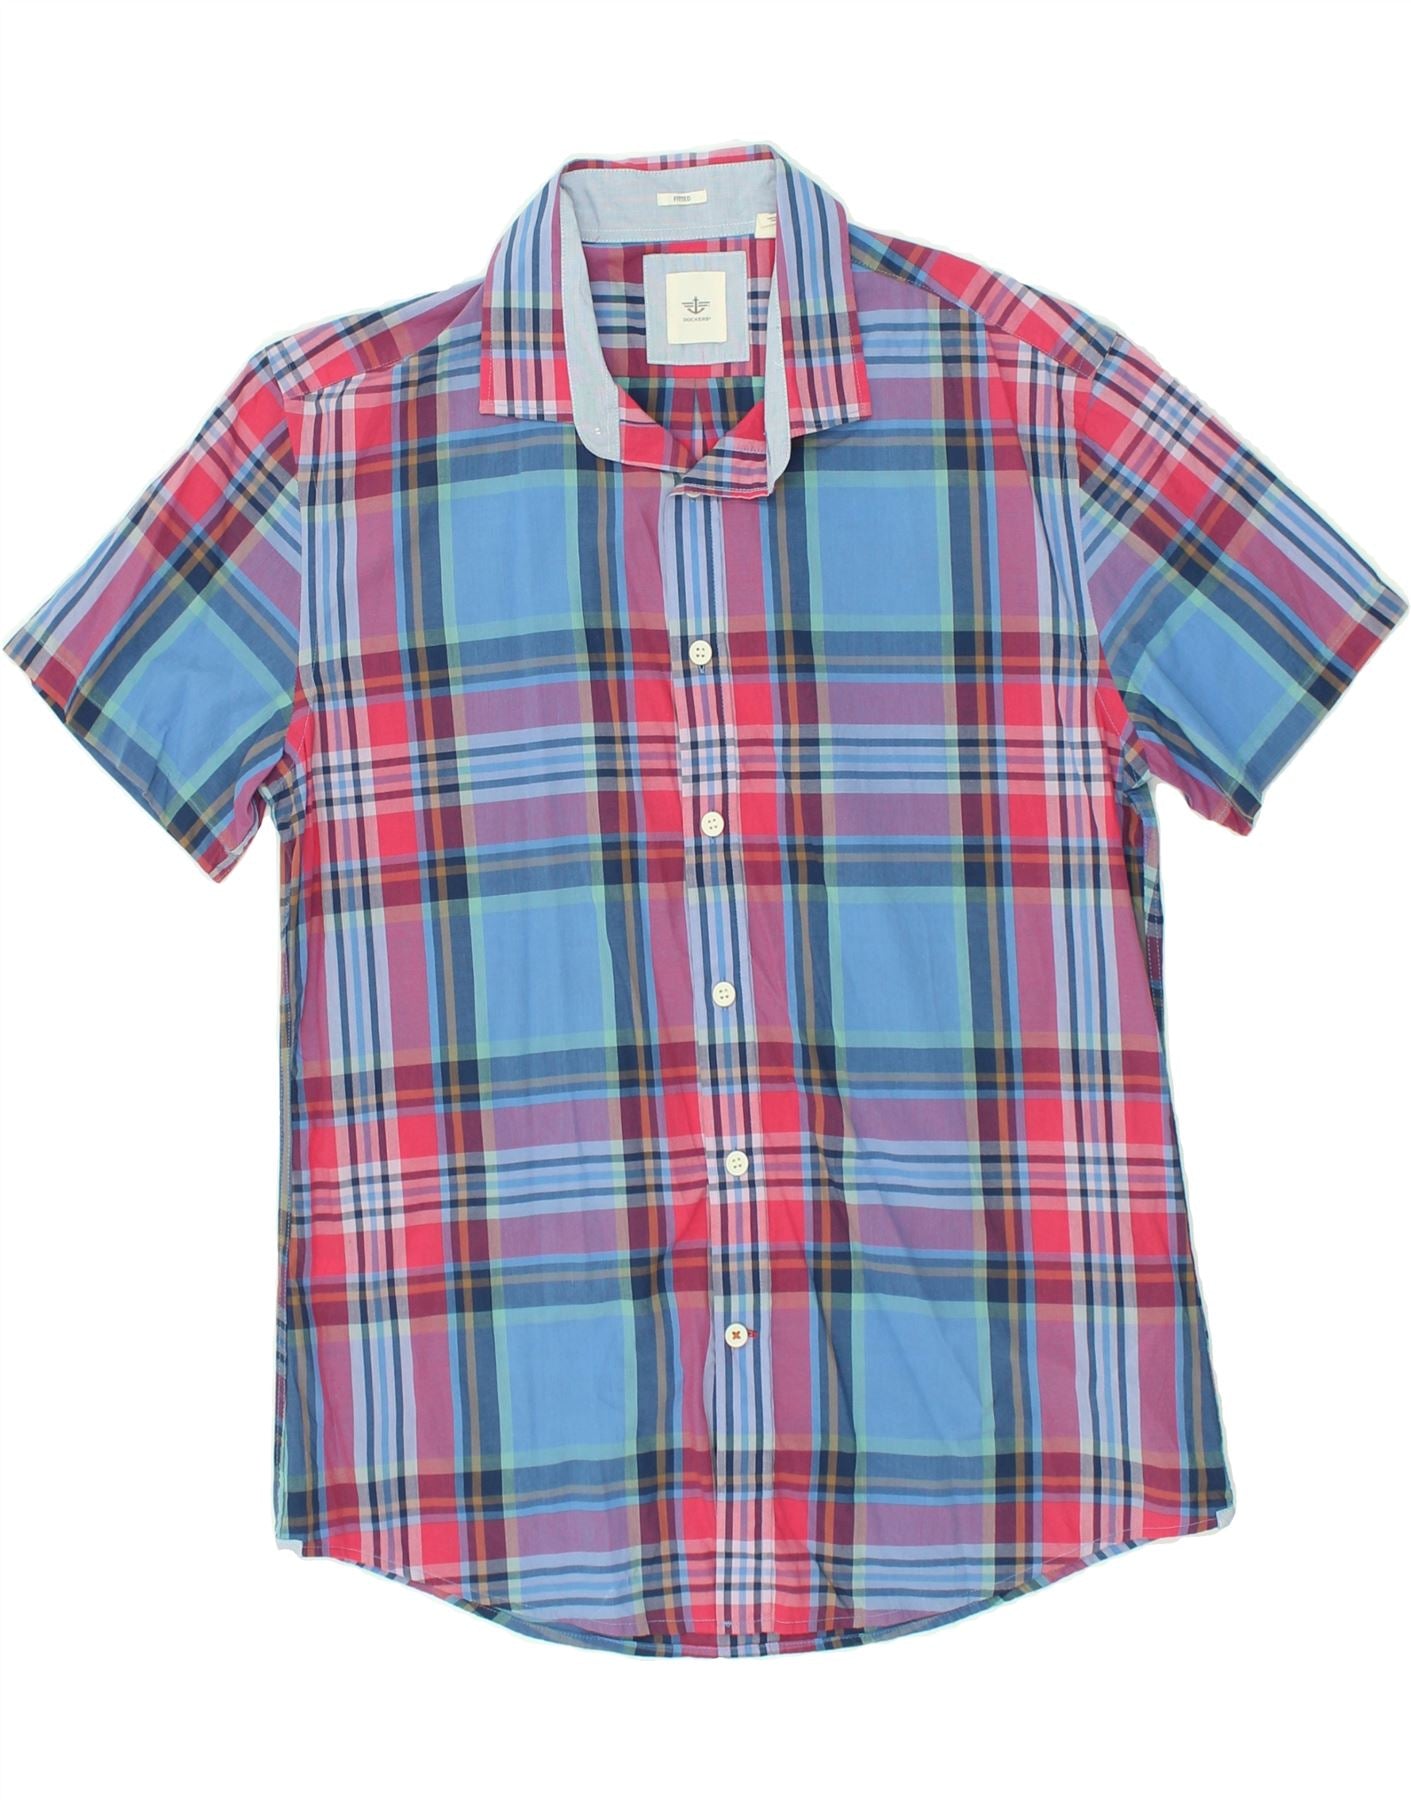 DOCKERS Mens Fitted Short Sleeve Shirt Large Blue Plaid Cotton